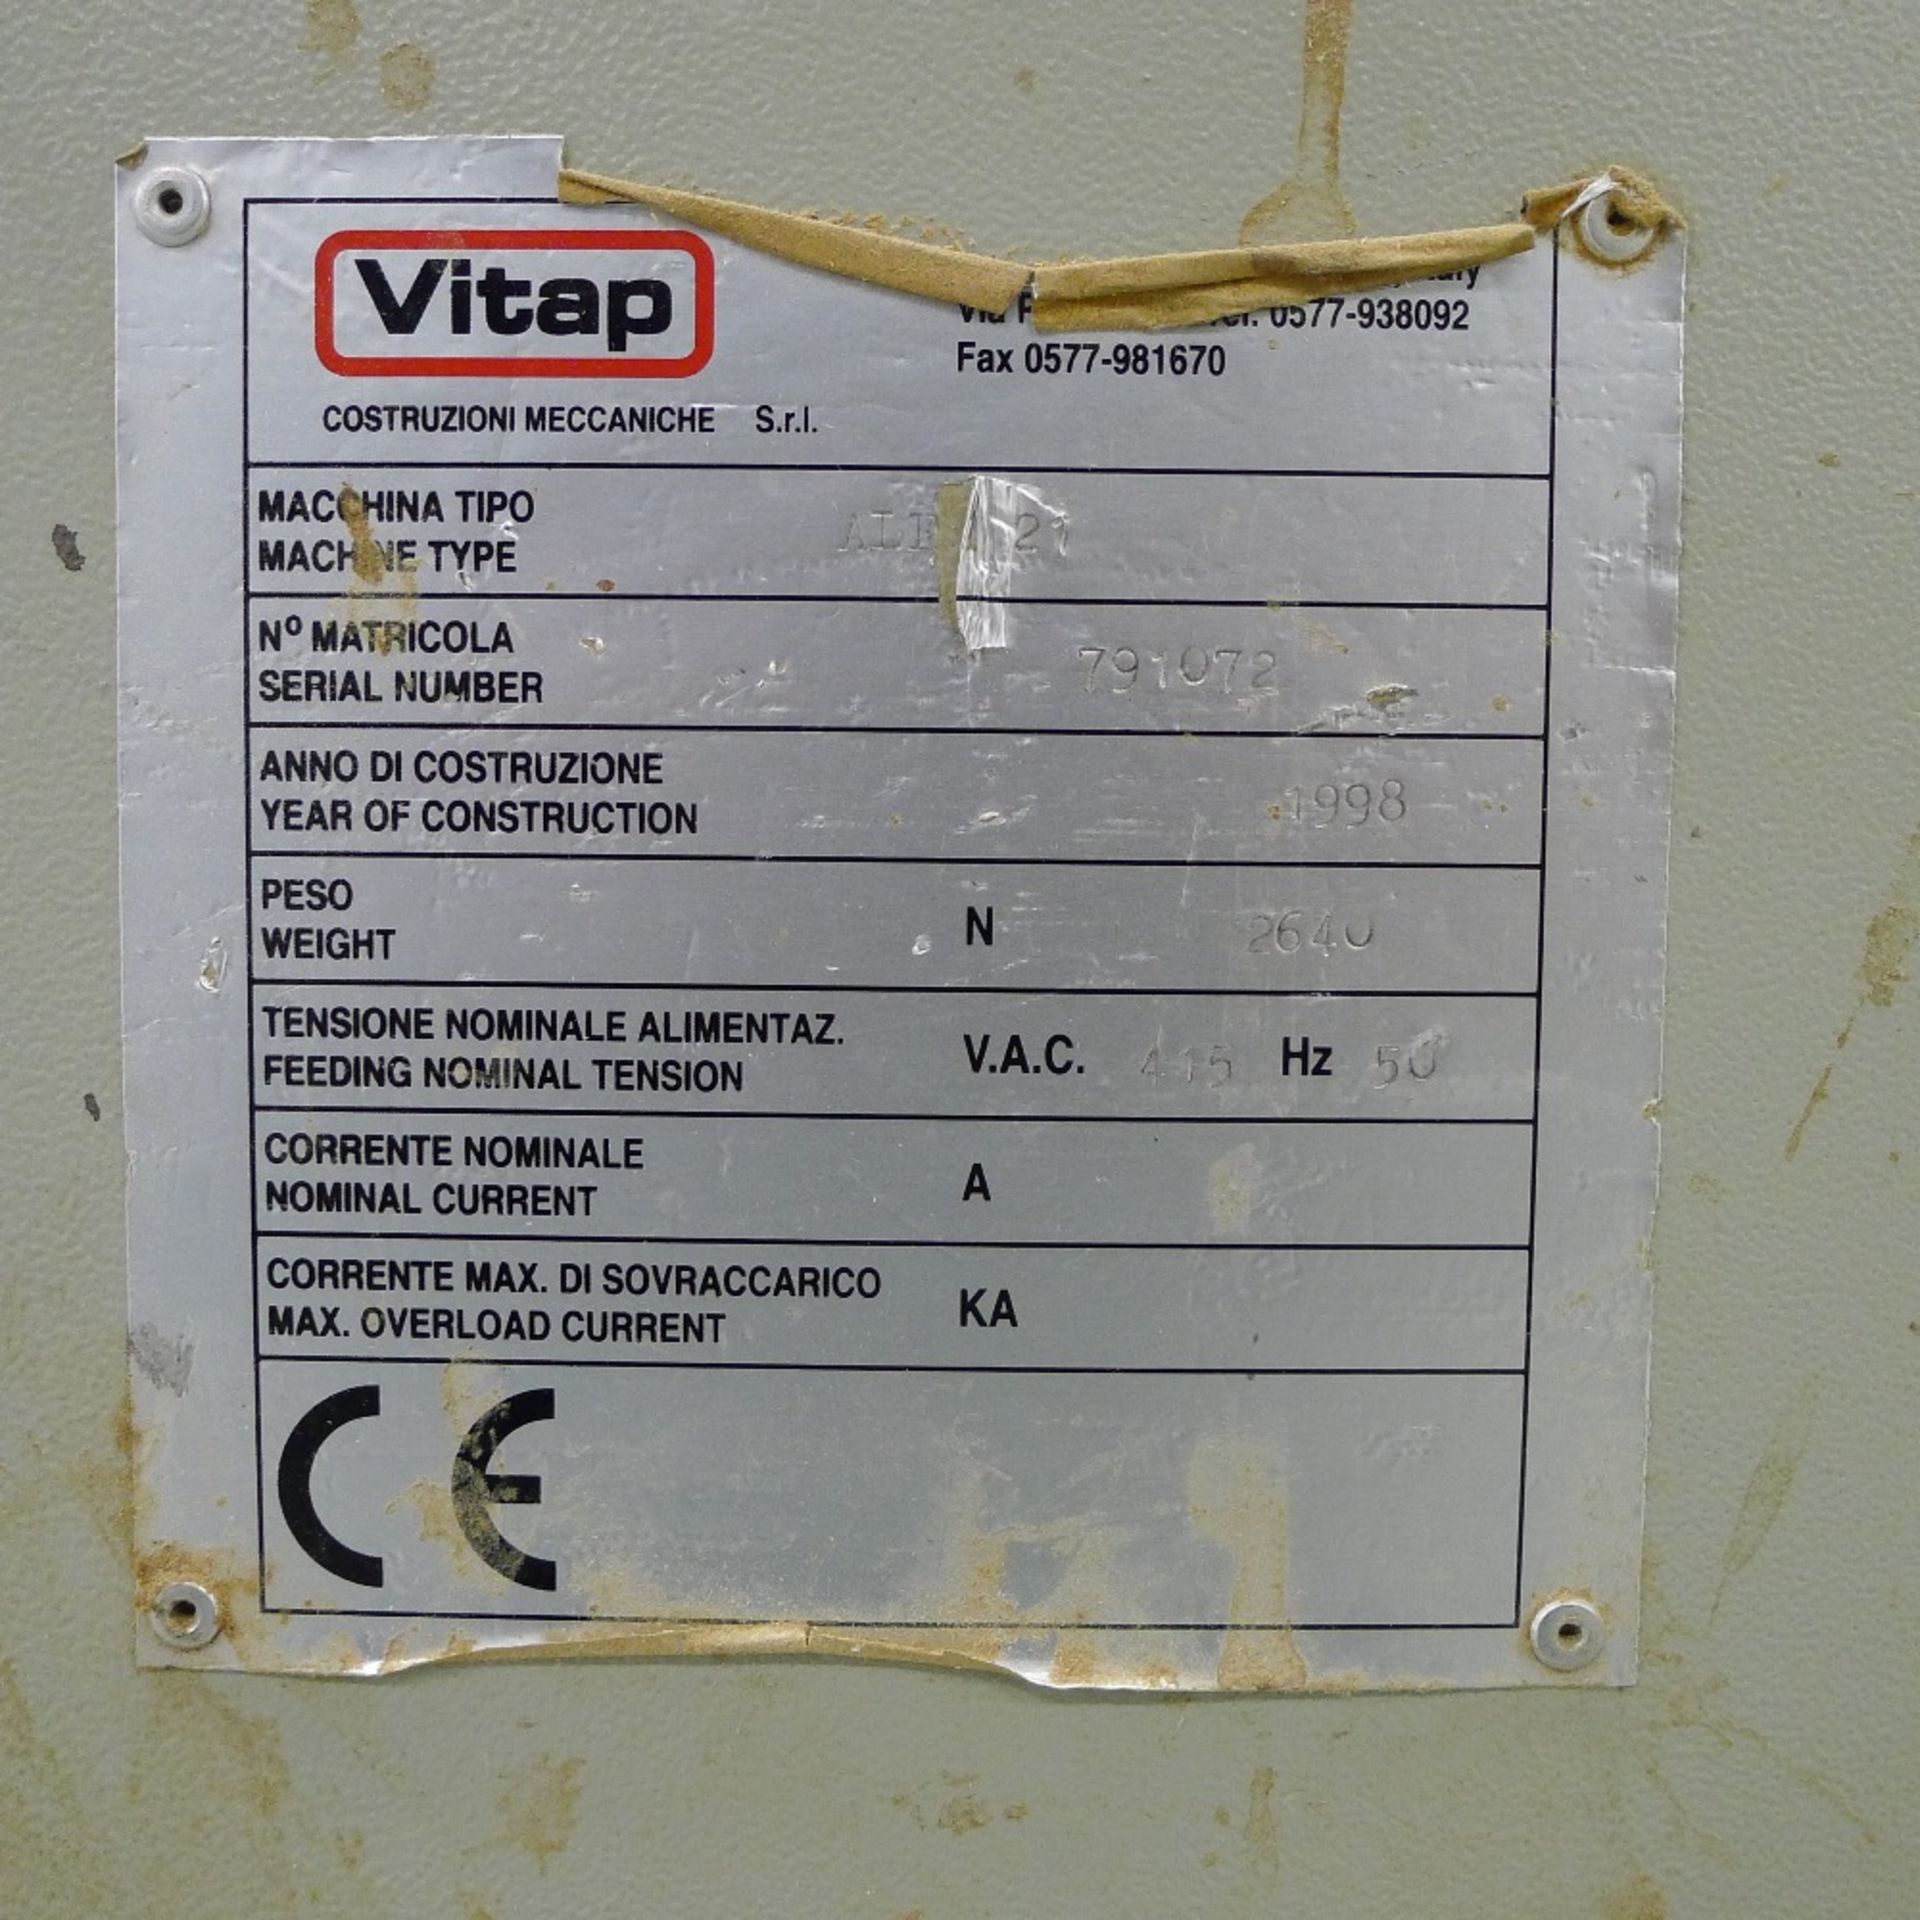 1 drilling and boring machine by Vitap type Alfa 21, s/n 791072, YOM 1998, 3ph, fitted with - Image 4 of 5